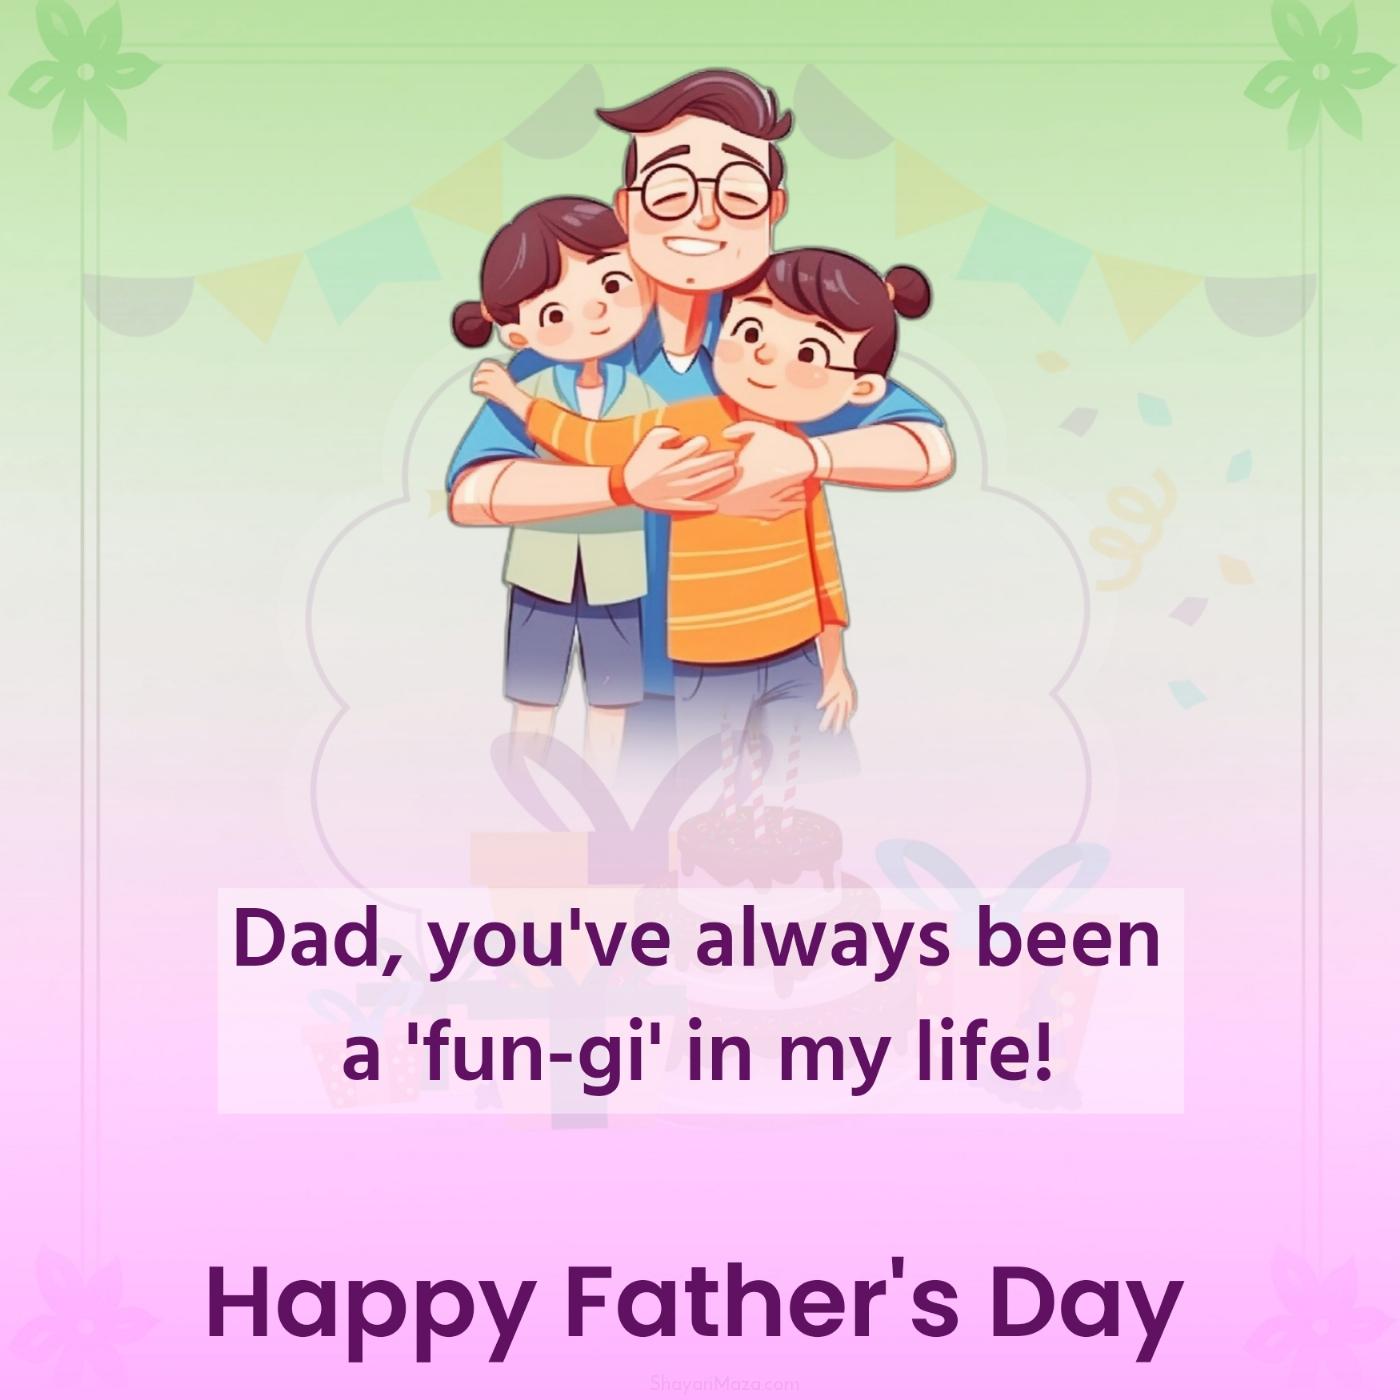 Dad you've always been a 'fun-gi' in my life